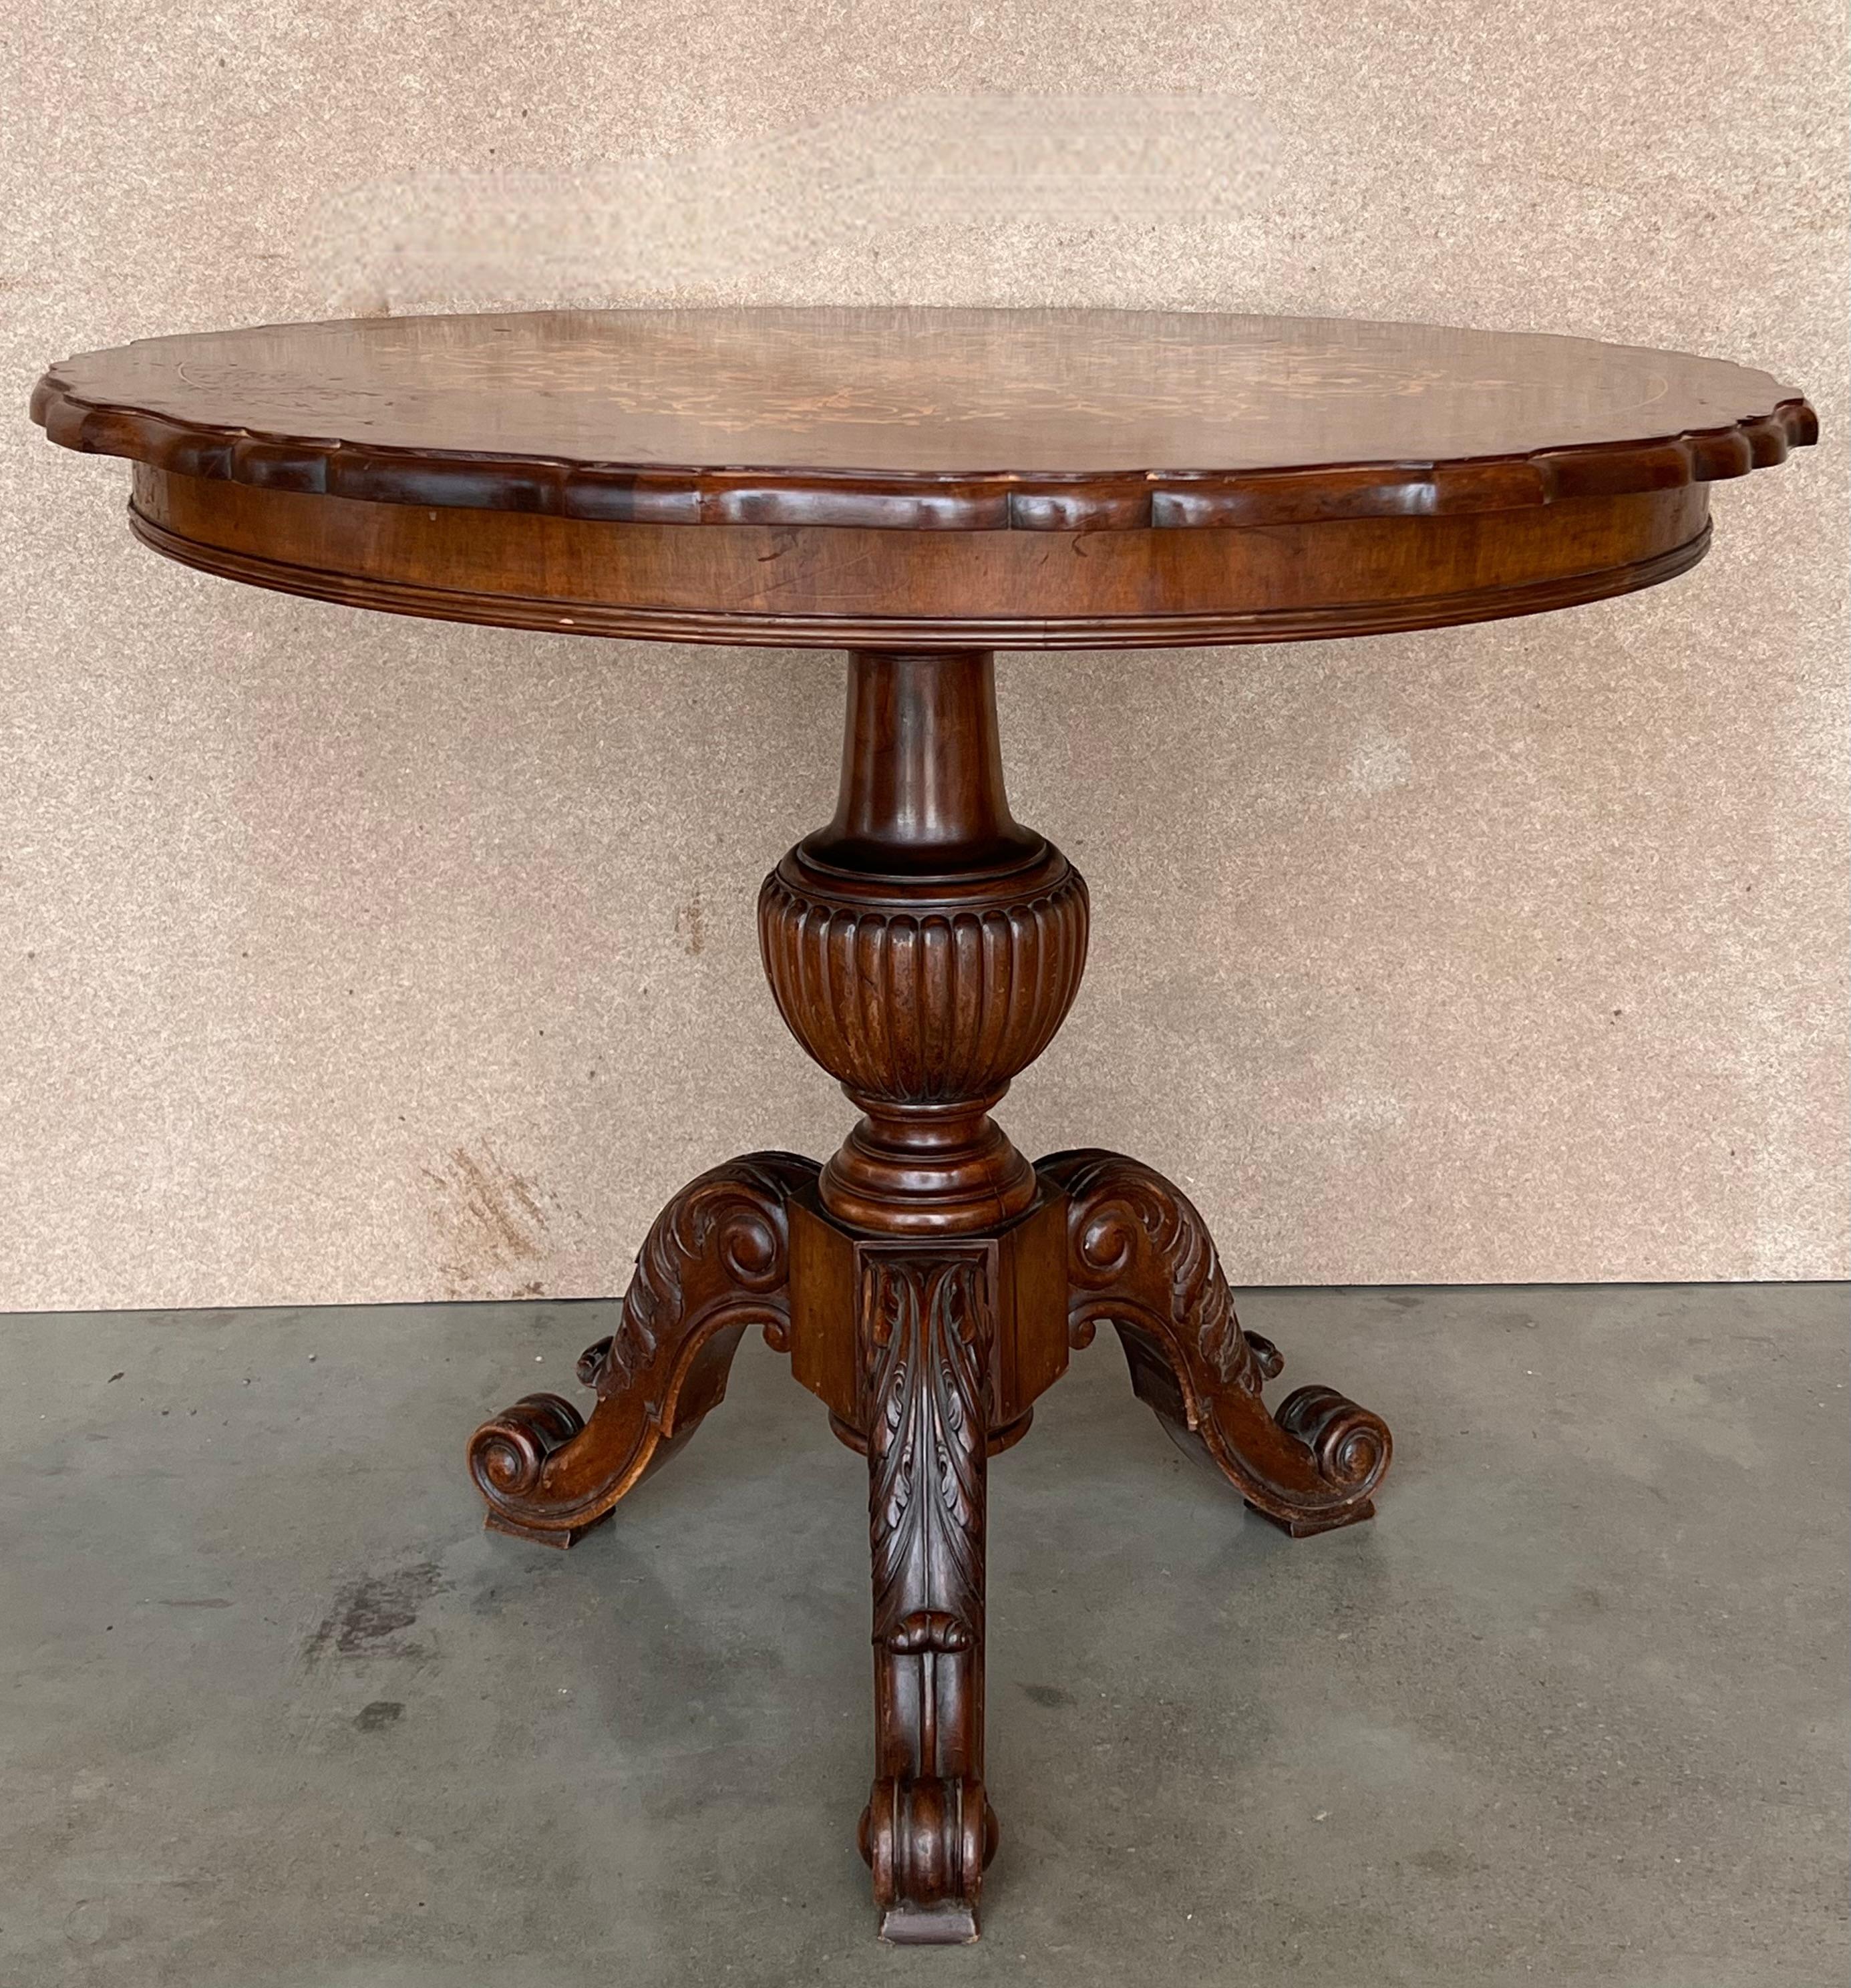 This Italian round pedestal wooden table from the mid to late 19th century features an exquisite floral and birds parquetry motif inlay on the top, surrounded by a sectional motif in the surround. The apron echoes the decorative fleur banding found